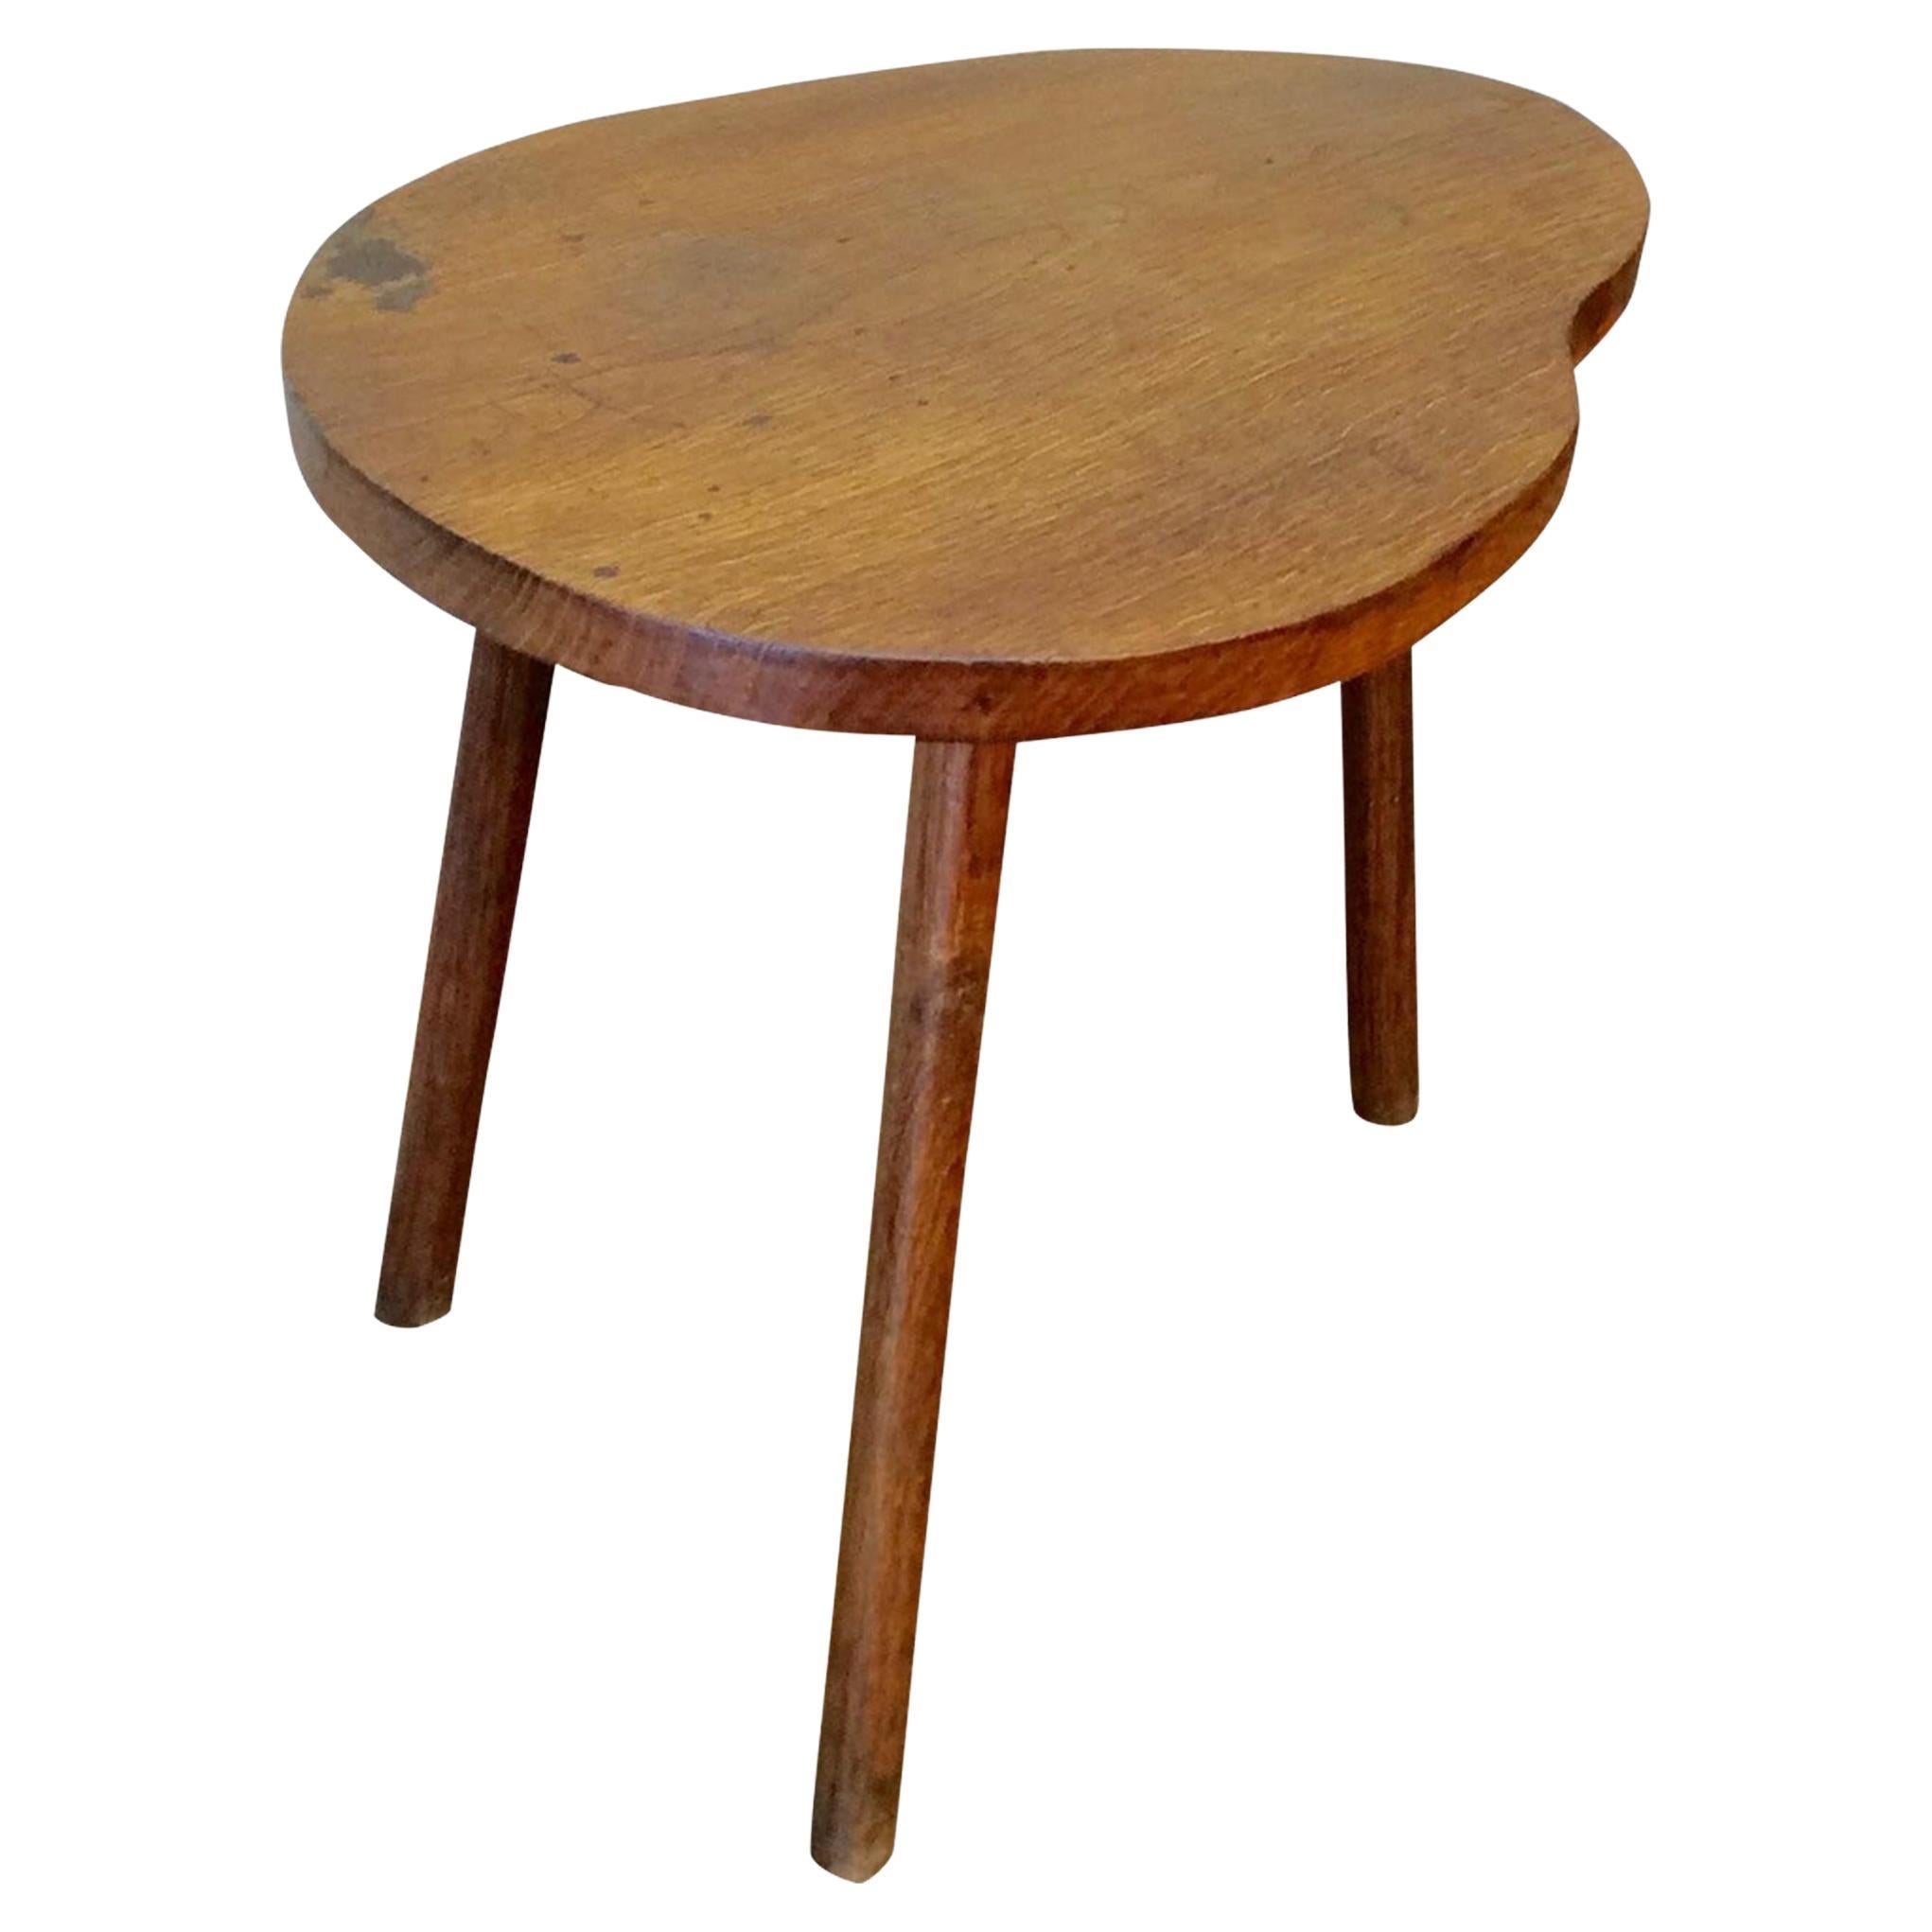 Mid-20th Century French Oak Biomorphic Side Table